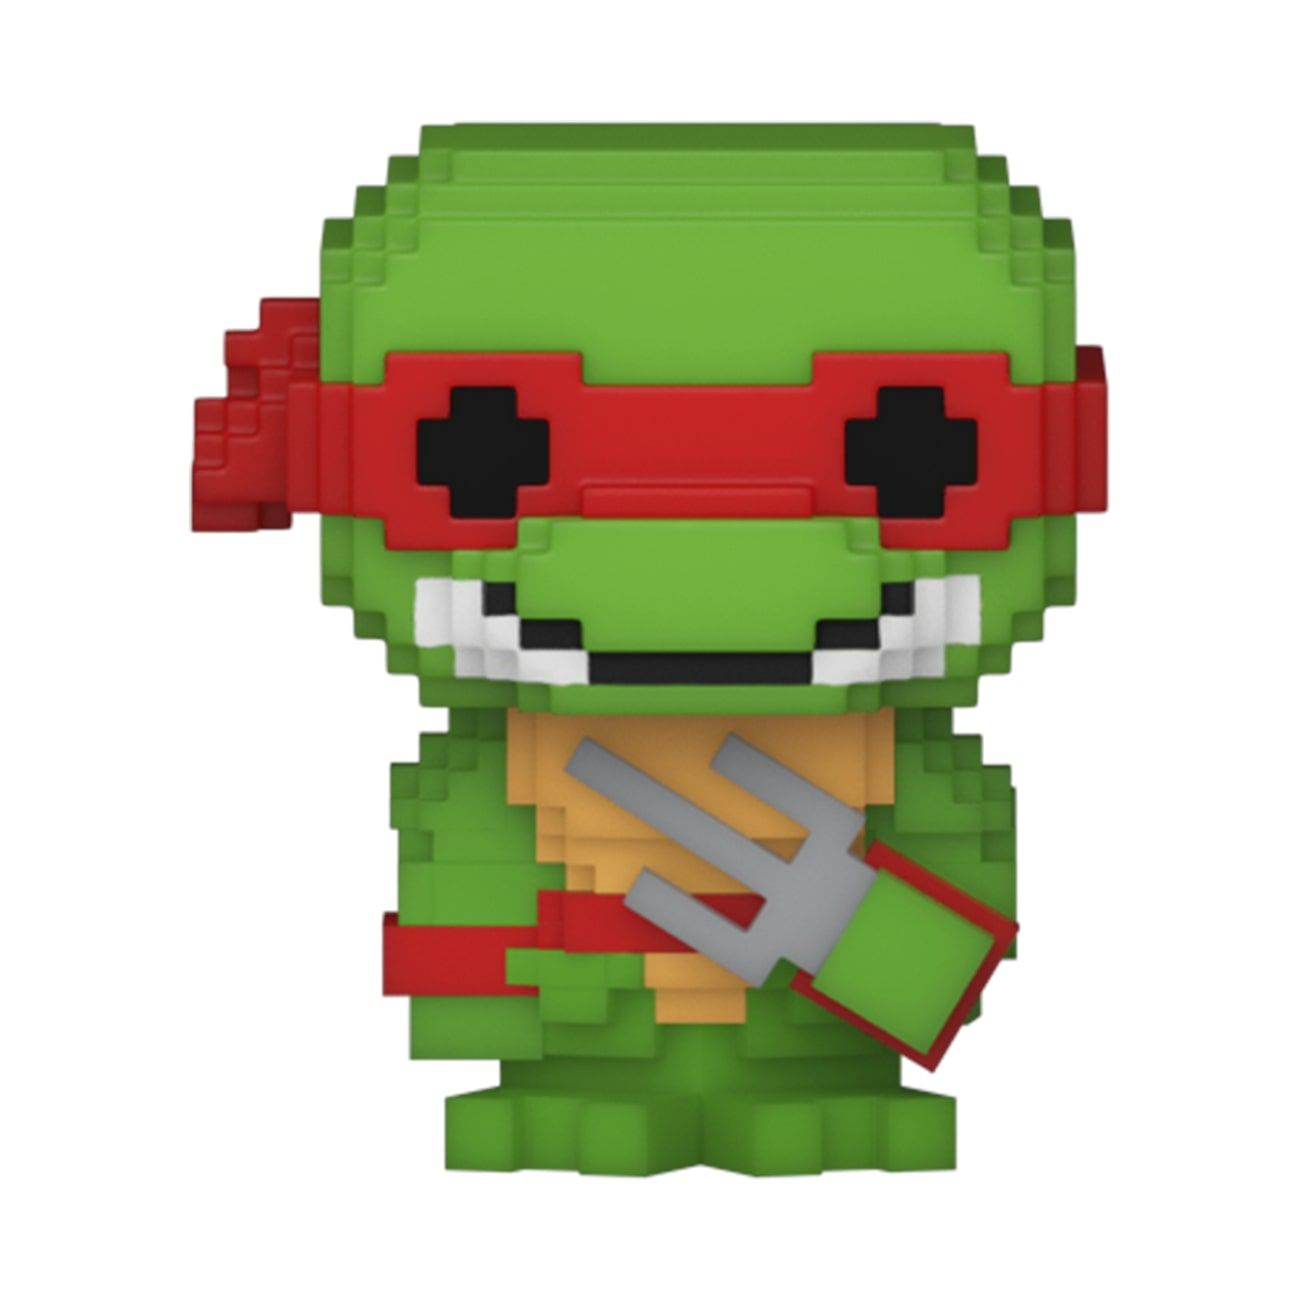 New Teenage Mutant Ninja Turtles Funko Bitty Pops Are Up For Preorder - IGN